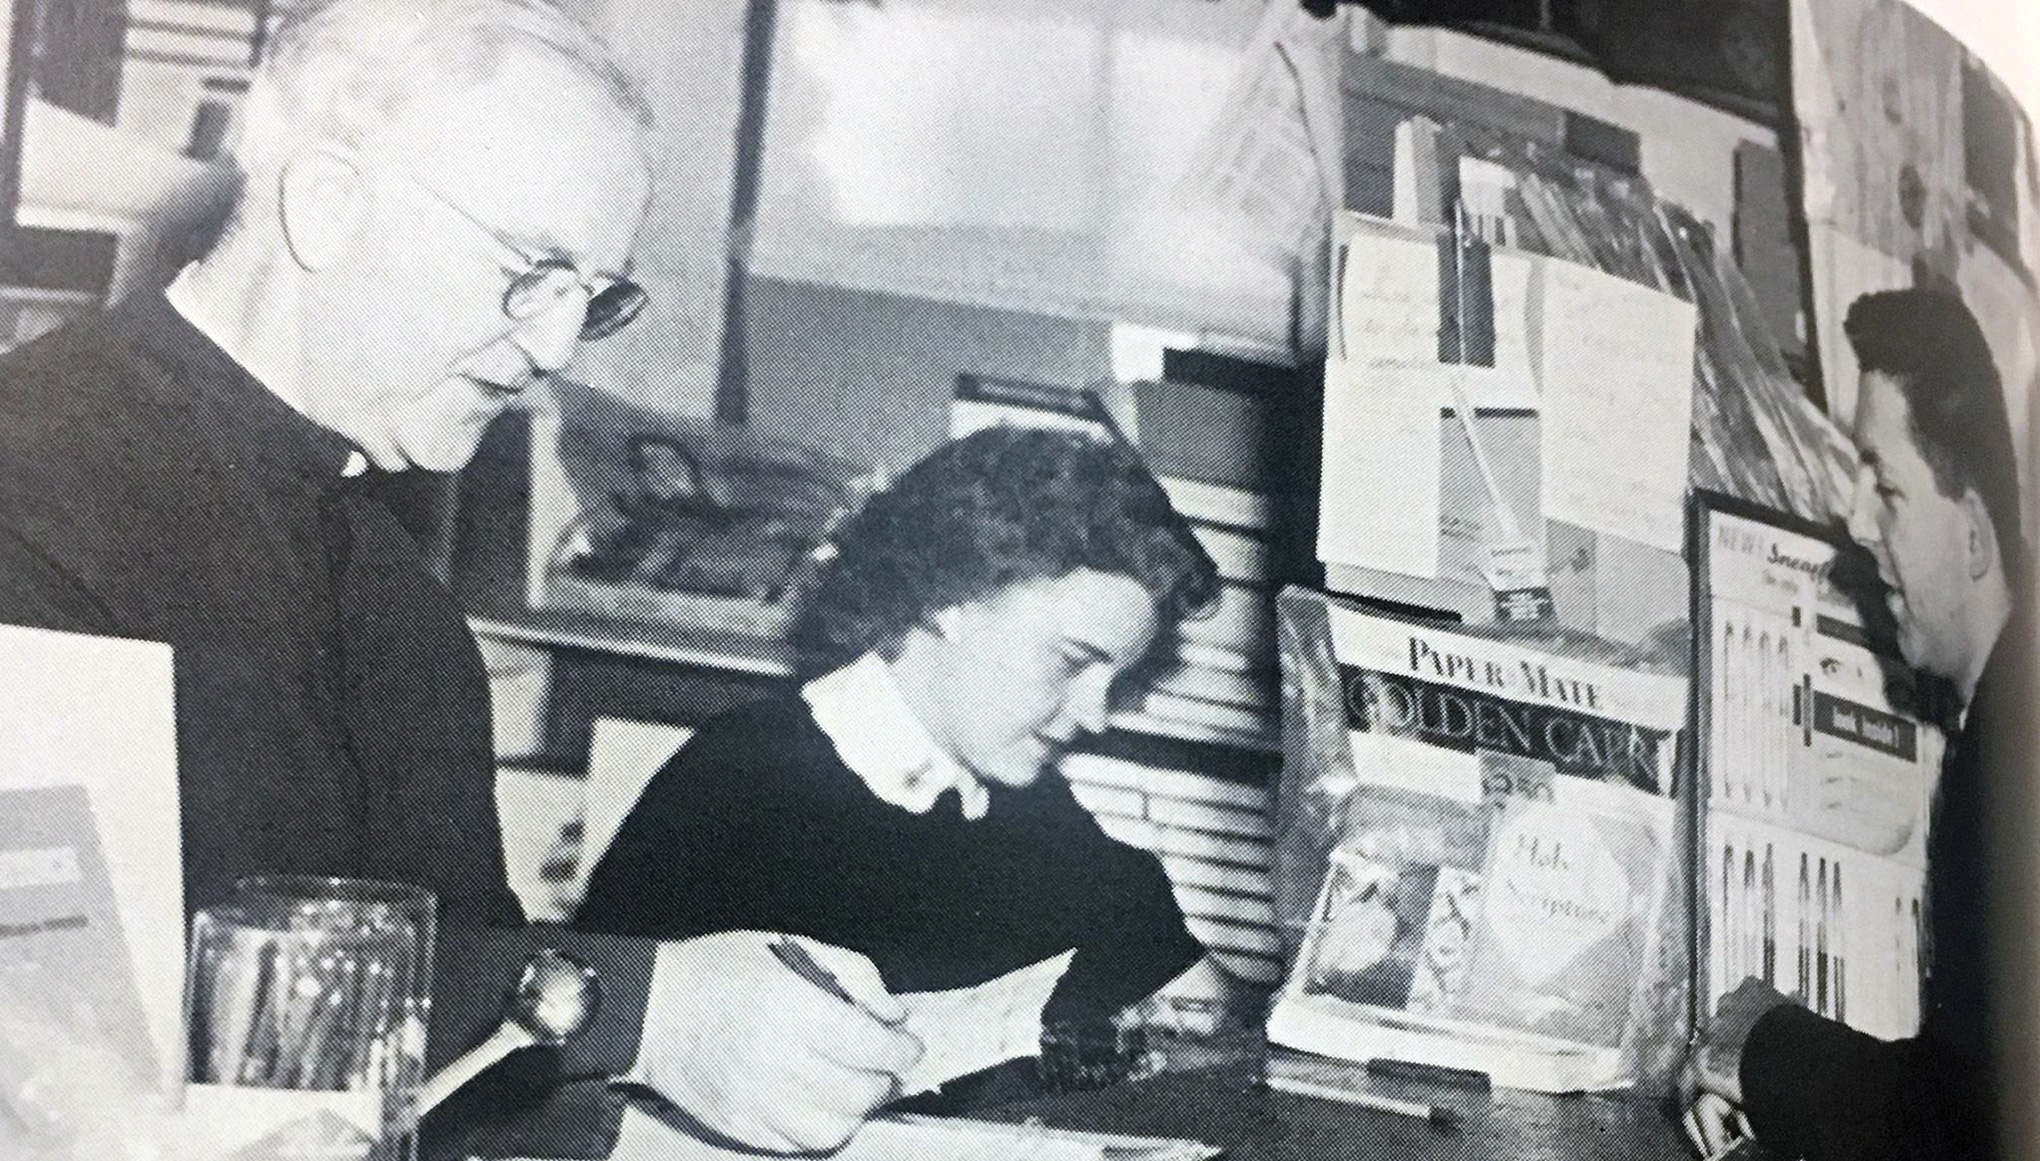 An old black and white of Brother Mulvaney and a nun working in the book store.